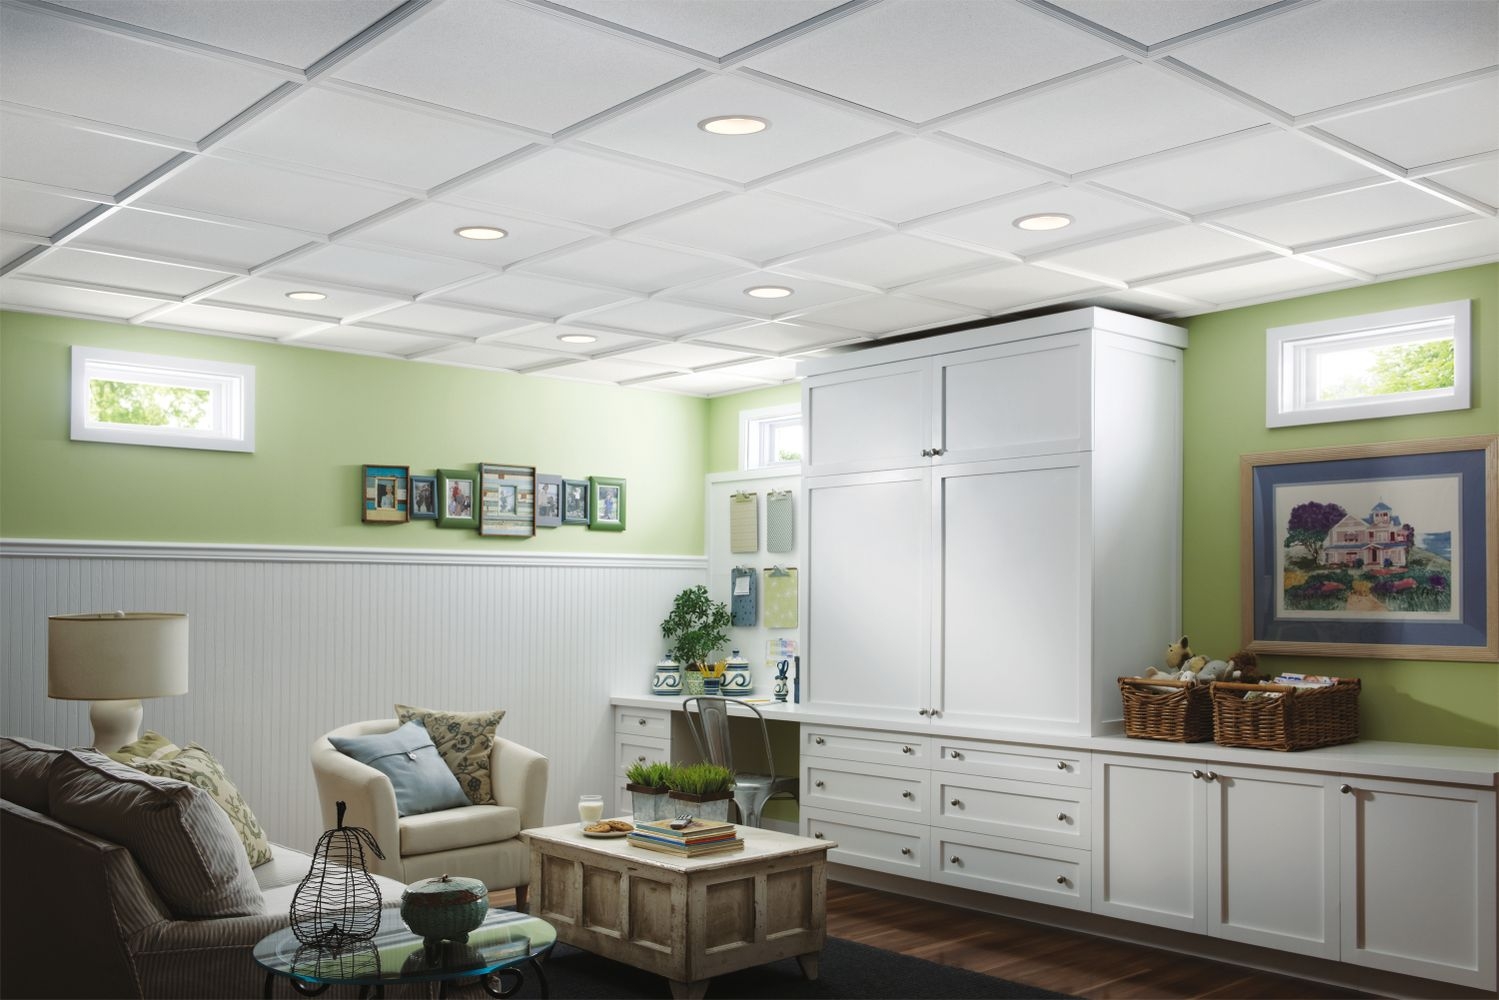 Best Armstrong Ceiling Tile For Basement